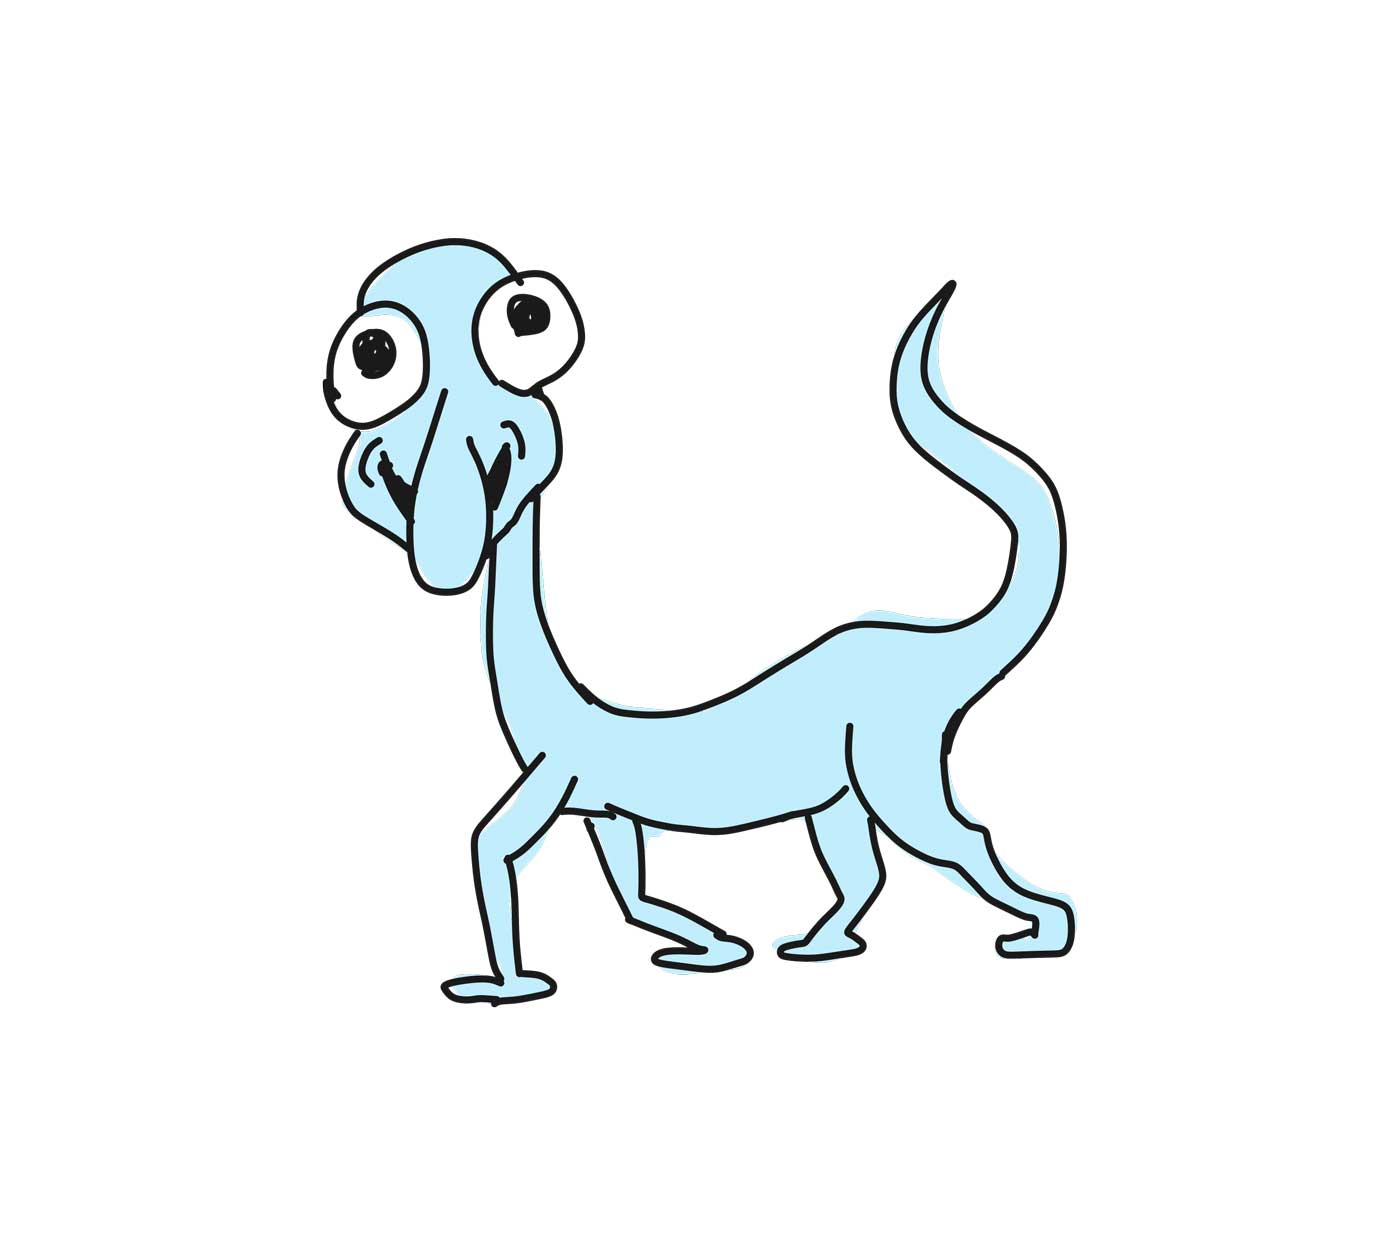 A light blue monster with four legs, a tail, crazy eyes and a long nose